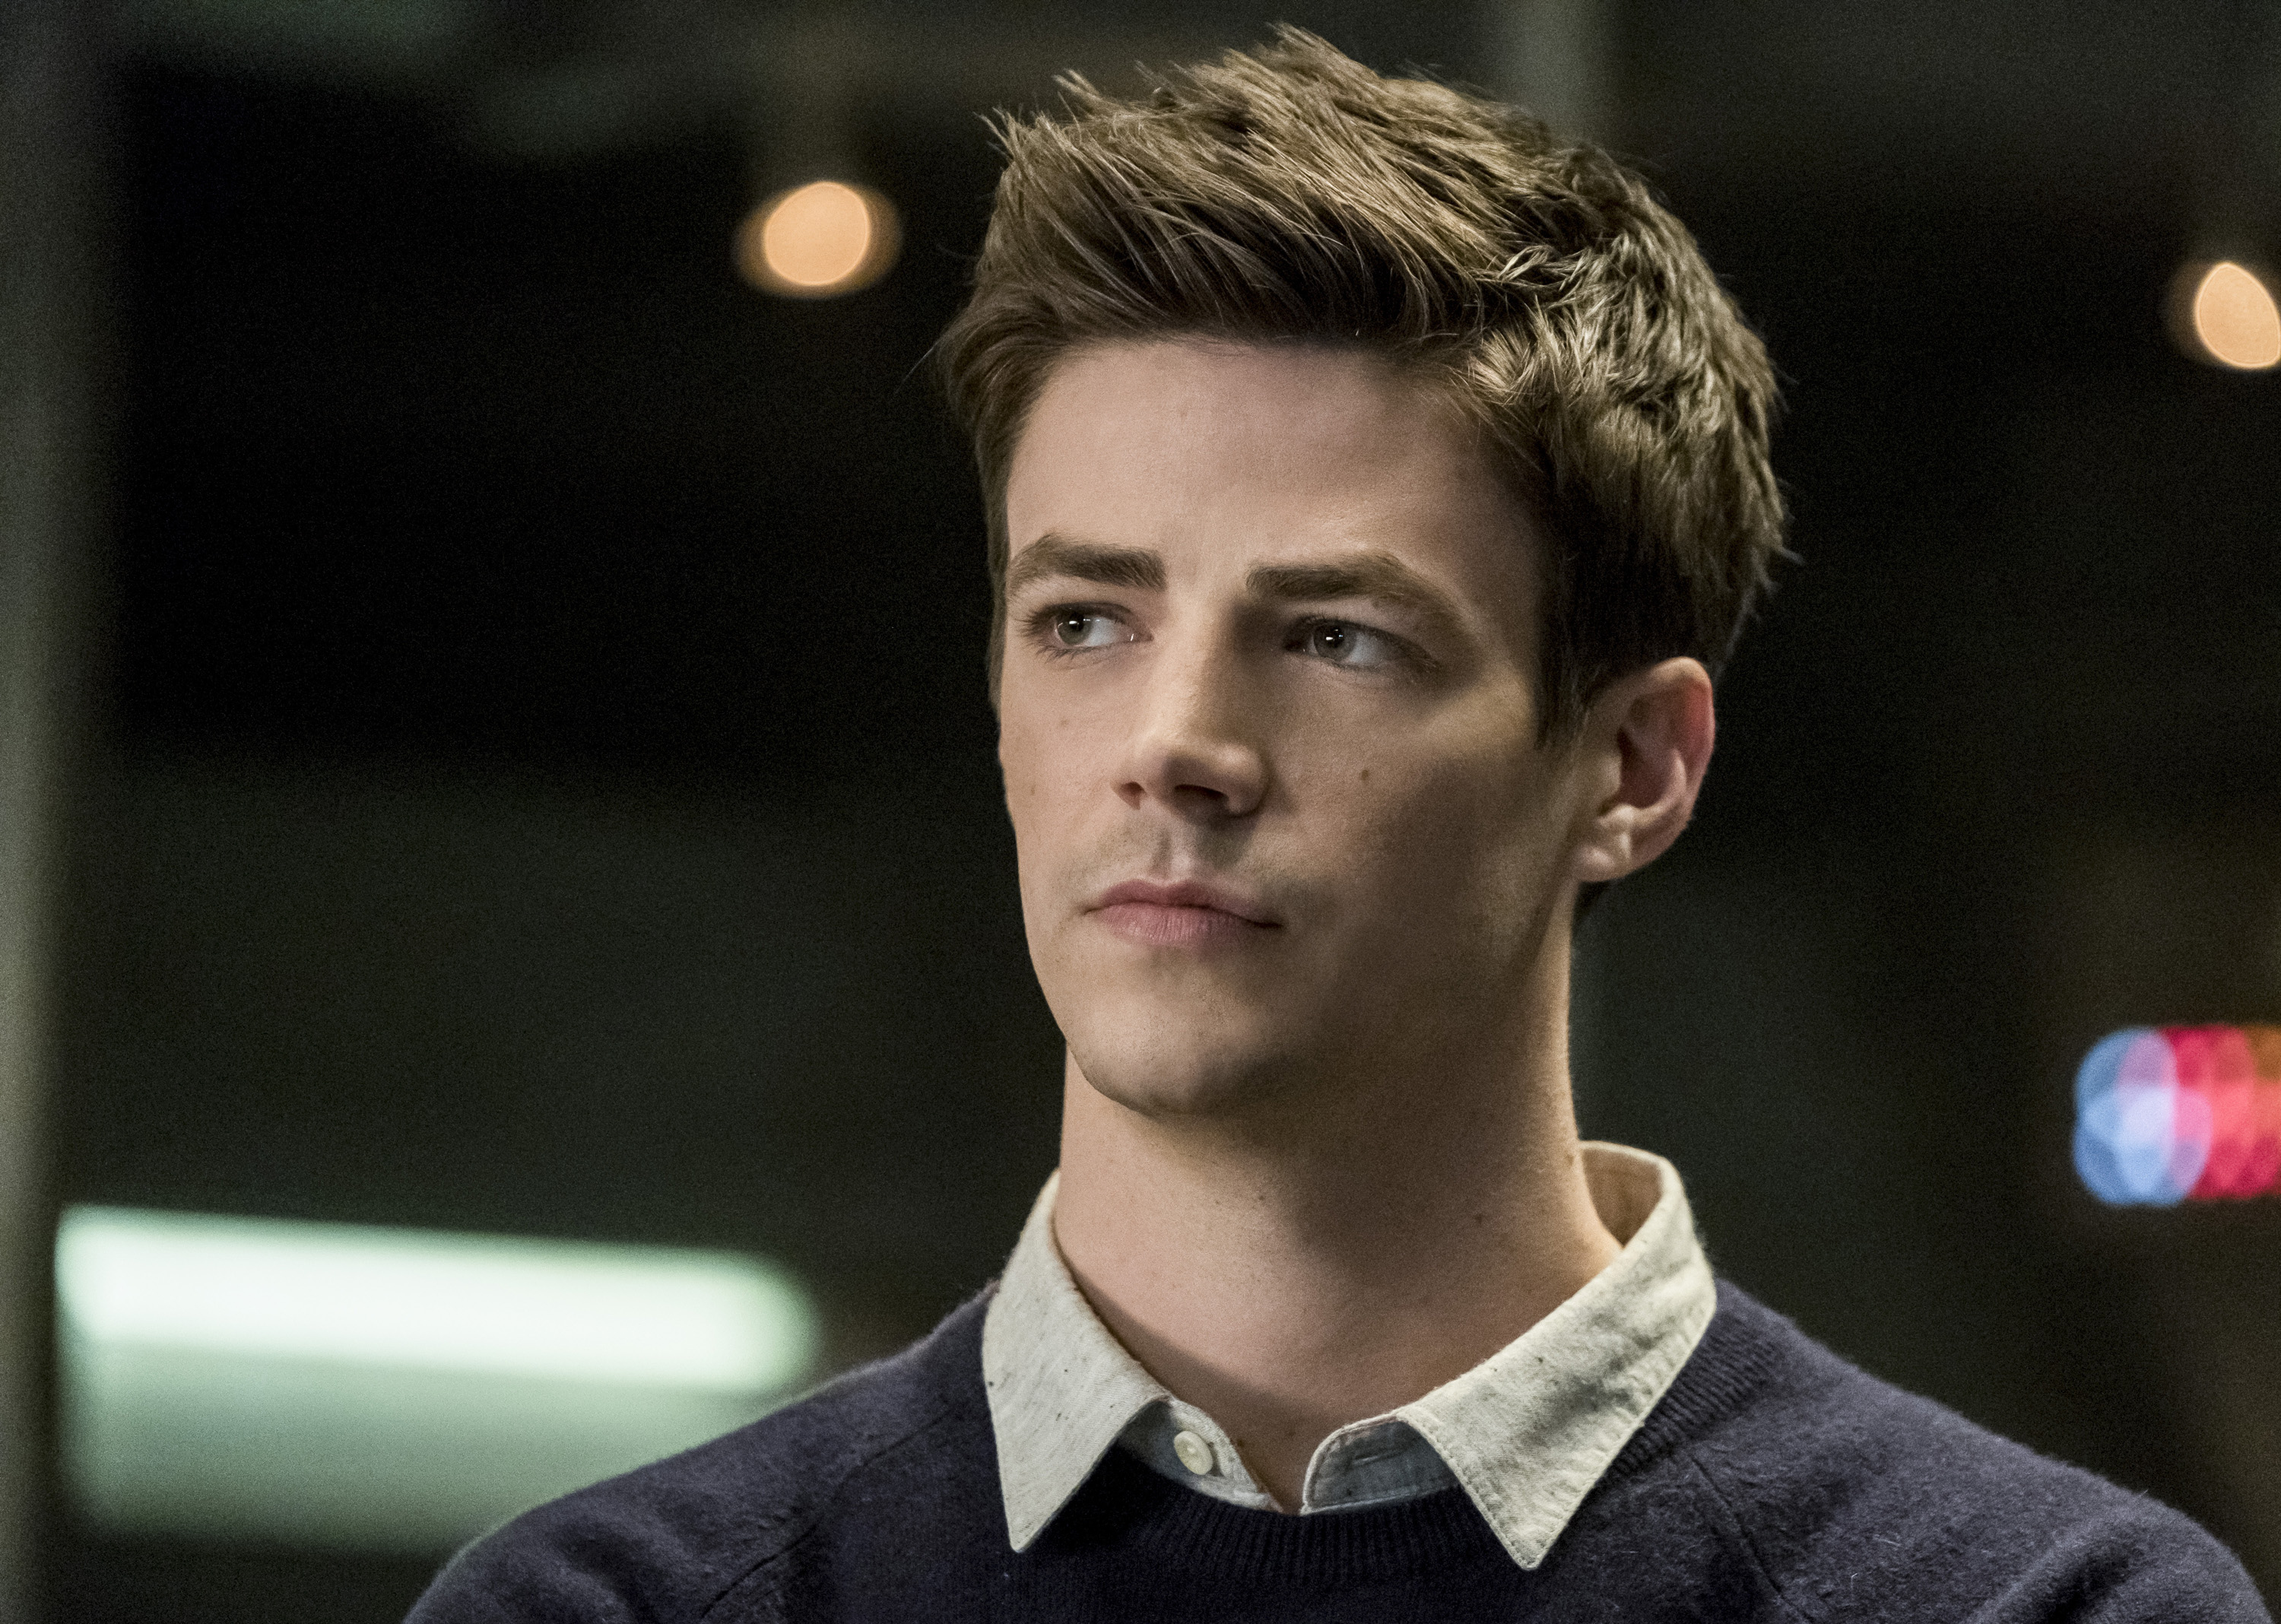 Grant Gustin As Flash Wallpapers